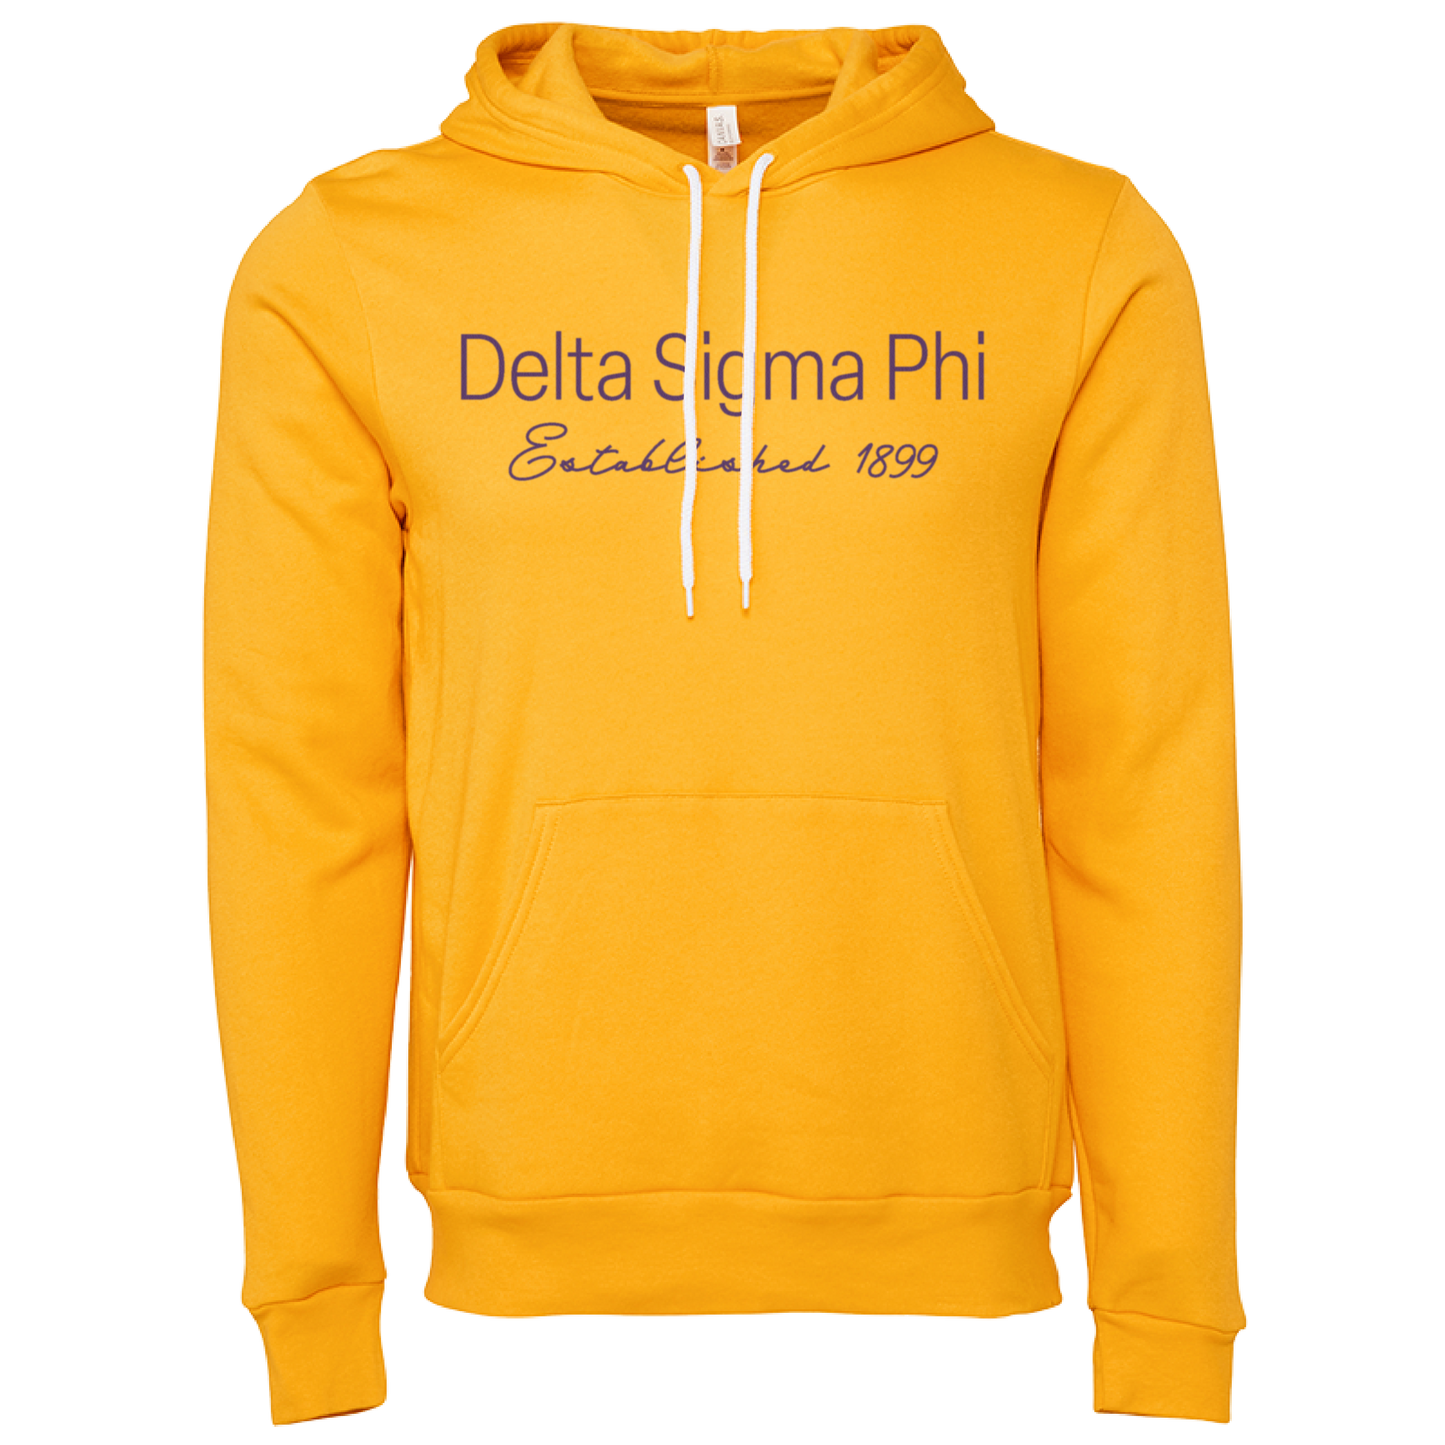 Delta Sigma Phi Embroidered Printed Name Hooded Sweatshirts